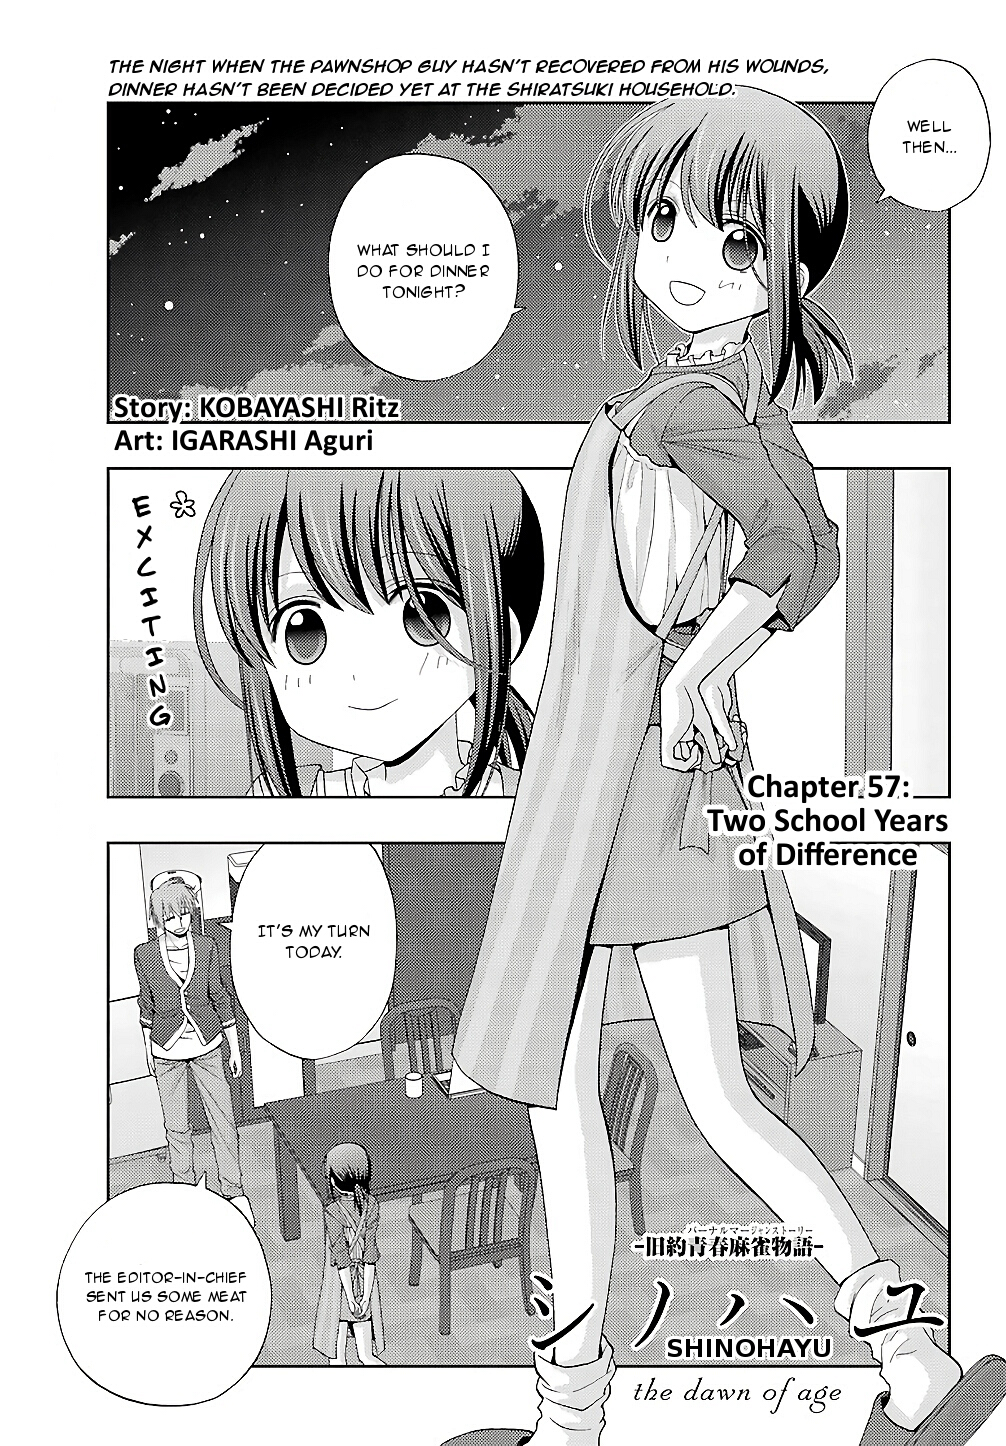 Side Story of Saki Shinohayu the Dawn of Age Ch. 57 Two School Years of Difference